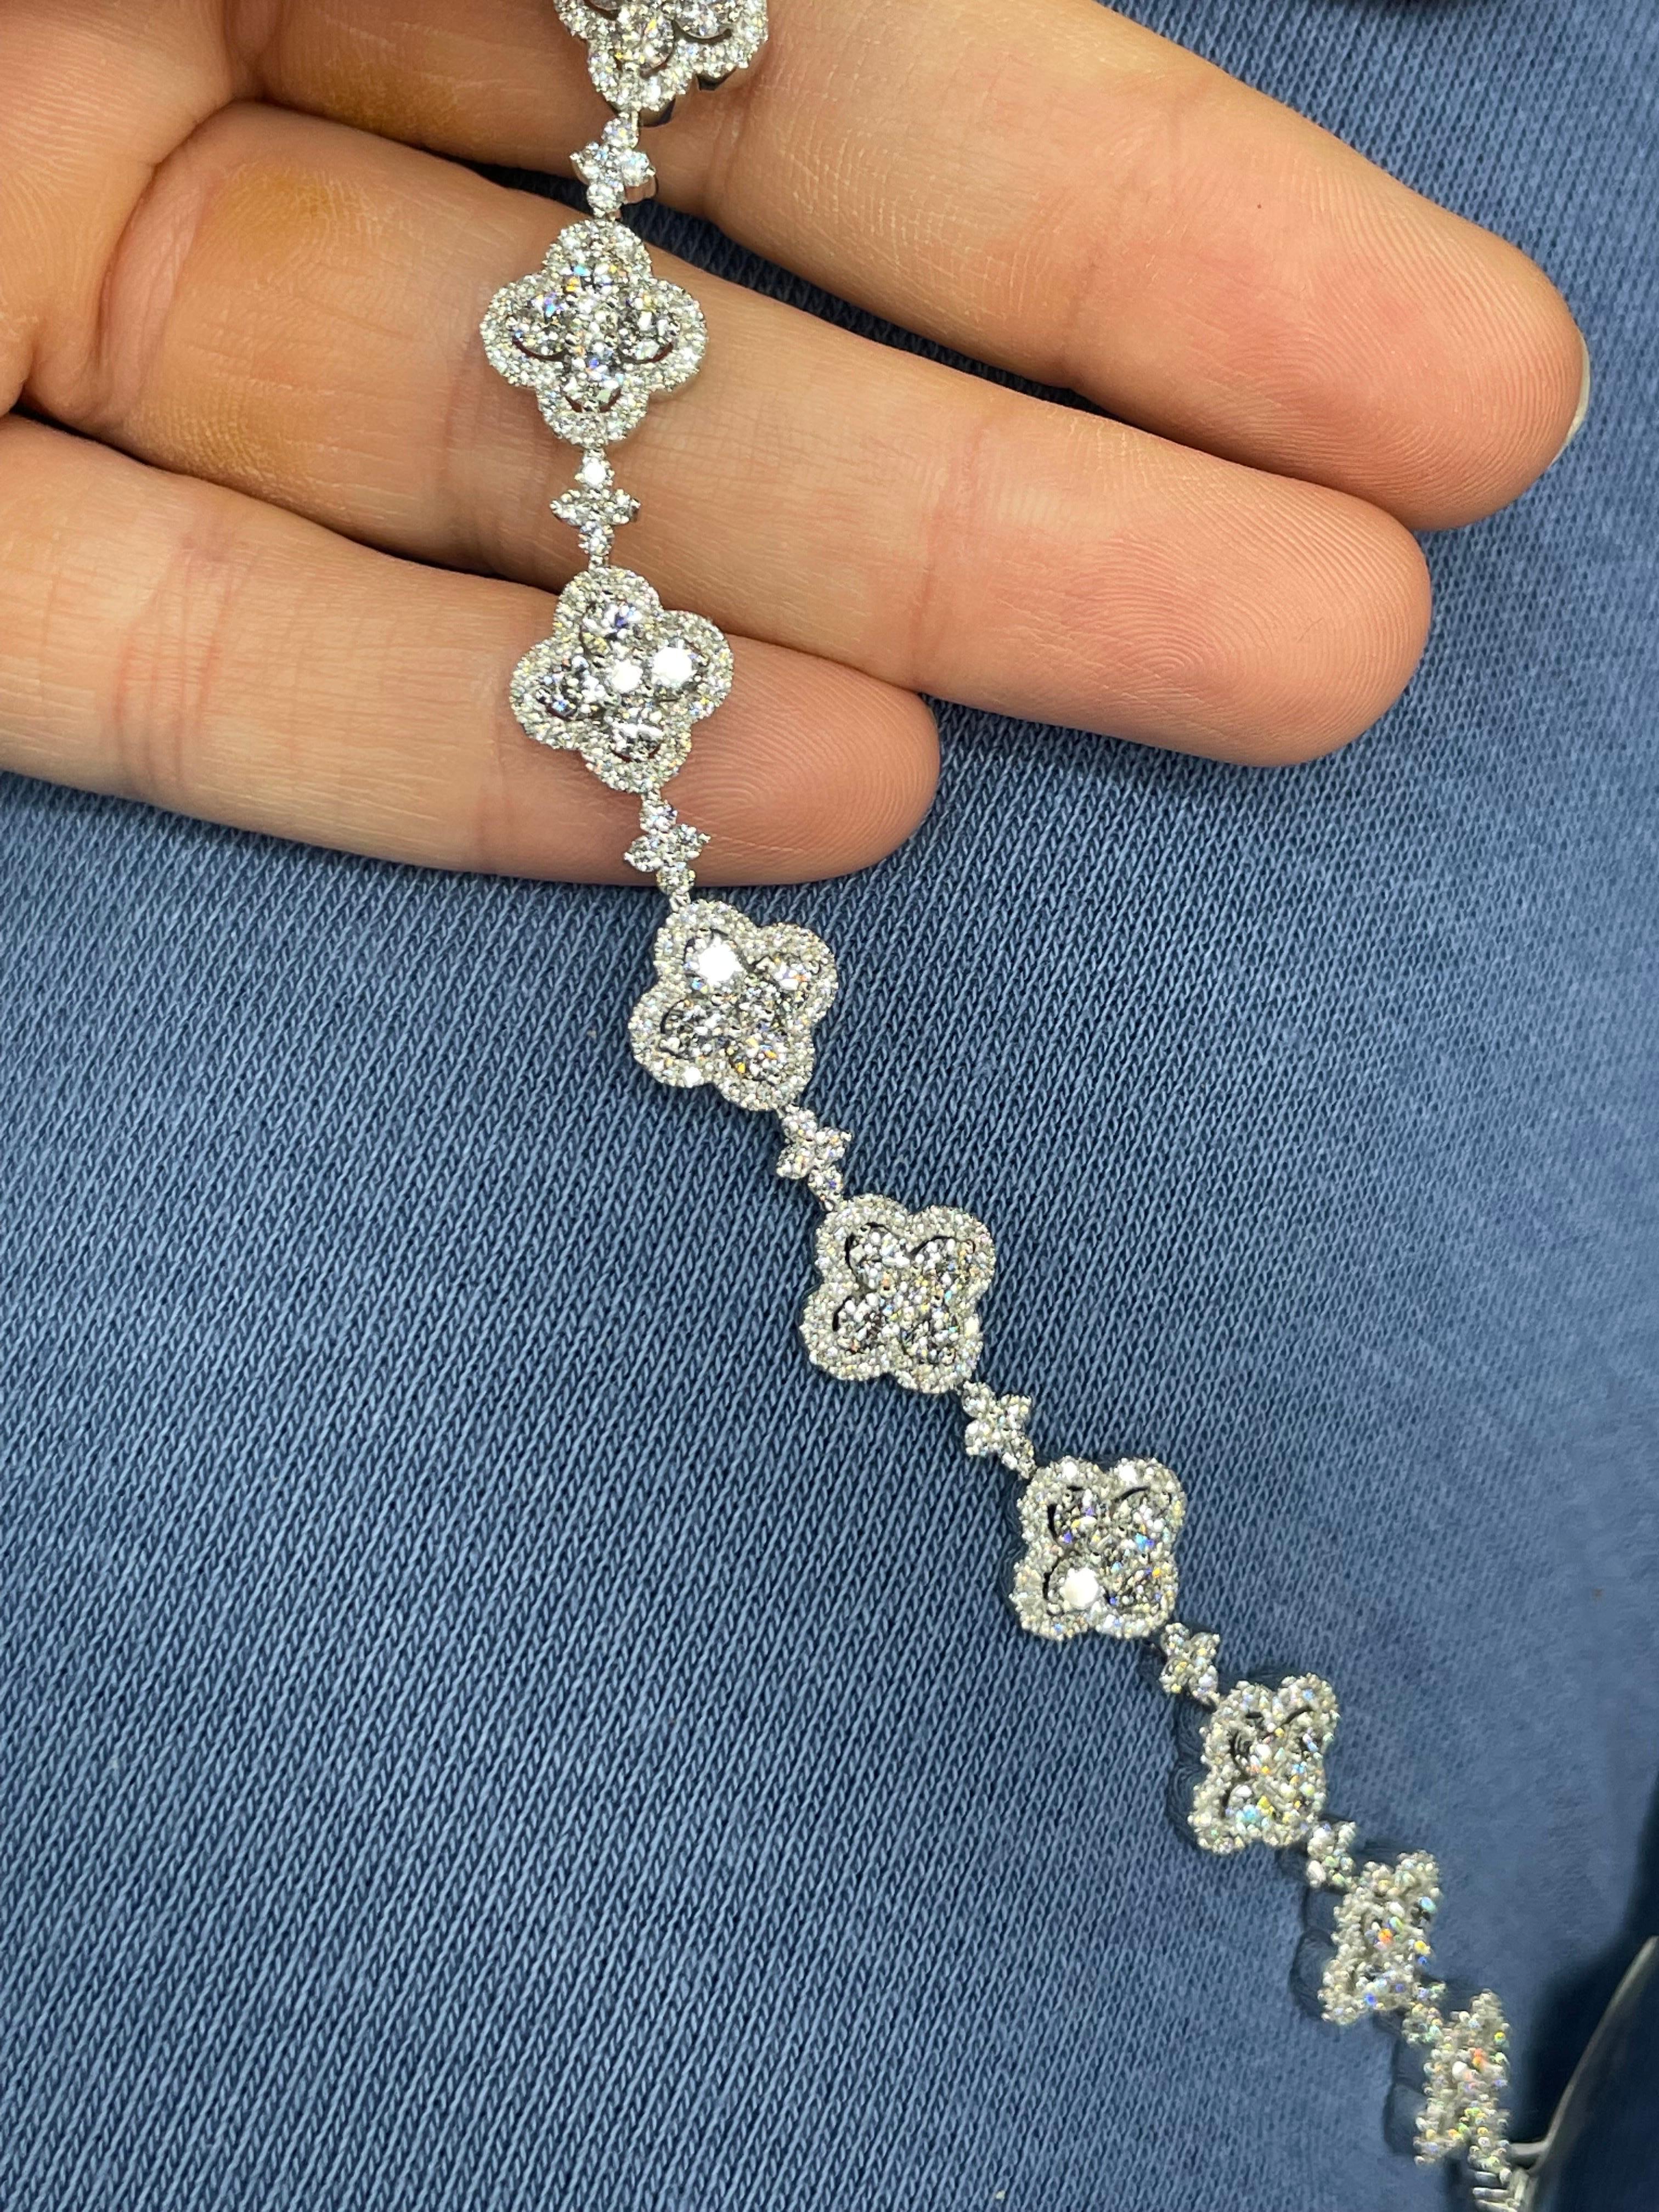 18 Karat White Gold Diamond Floral Tennis Bracelet 6.55 Carats 15 Grams In New Condition For Sale In New York, NY